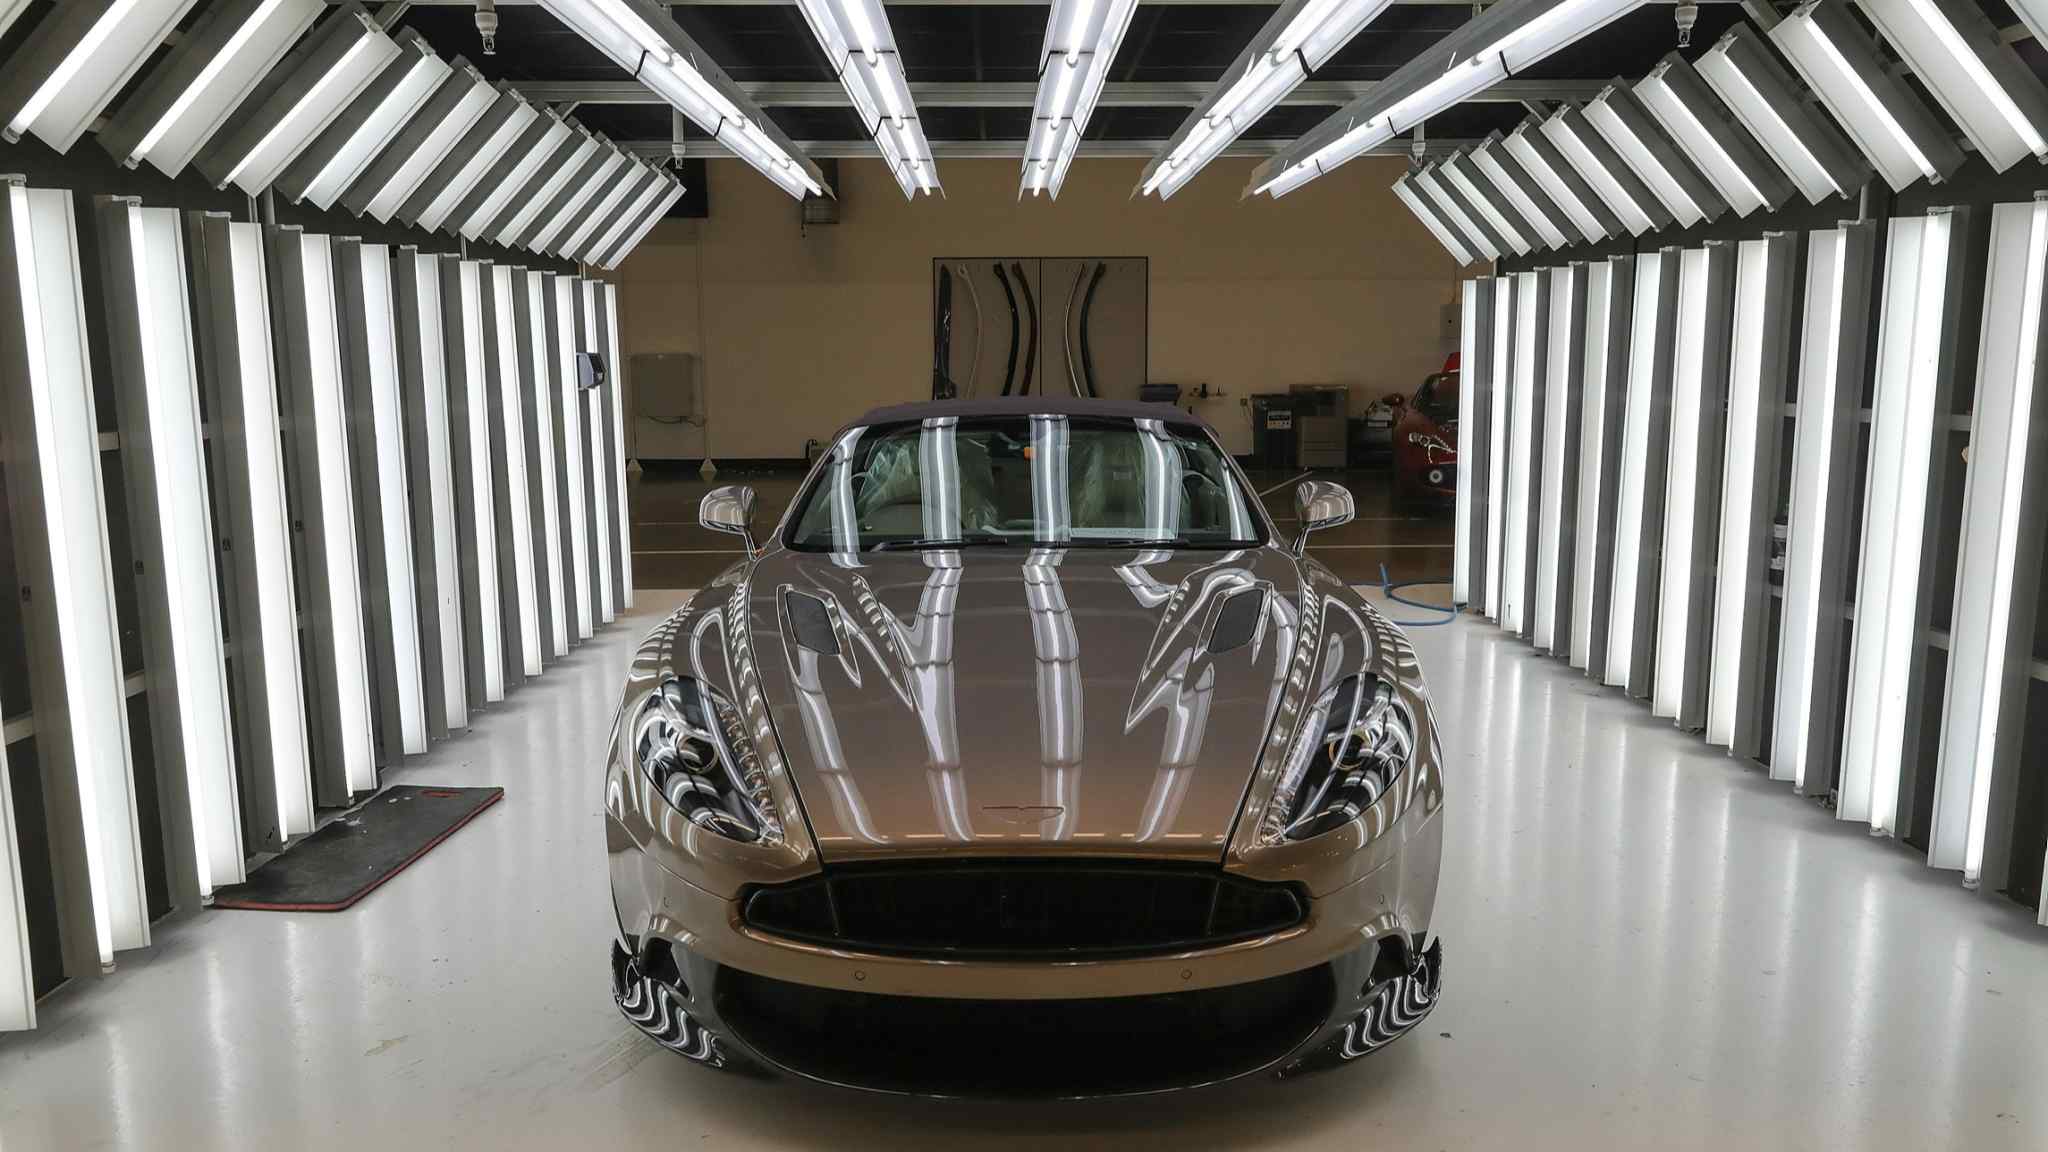 Chinese carmaker Geely takes 8% stake in Aston Martin